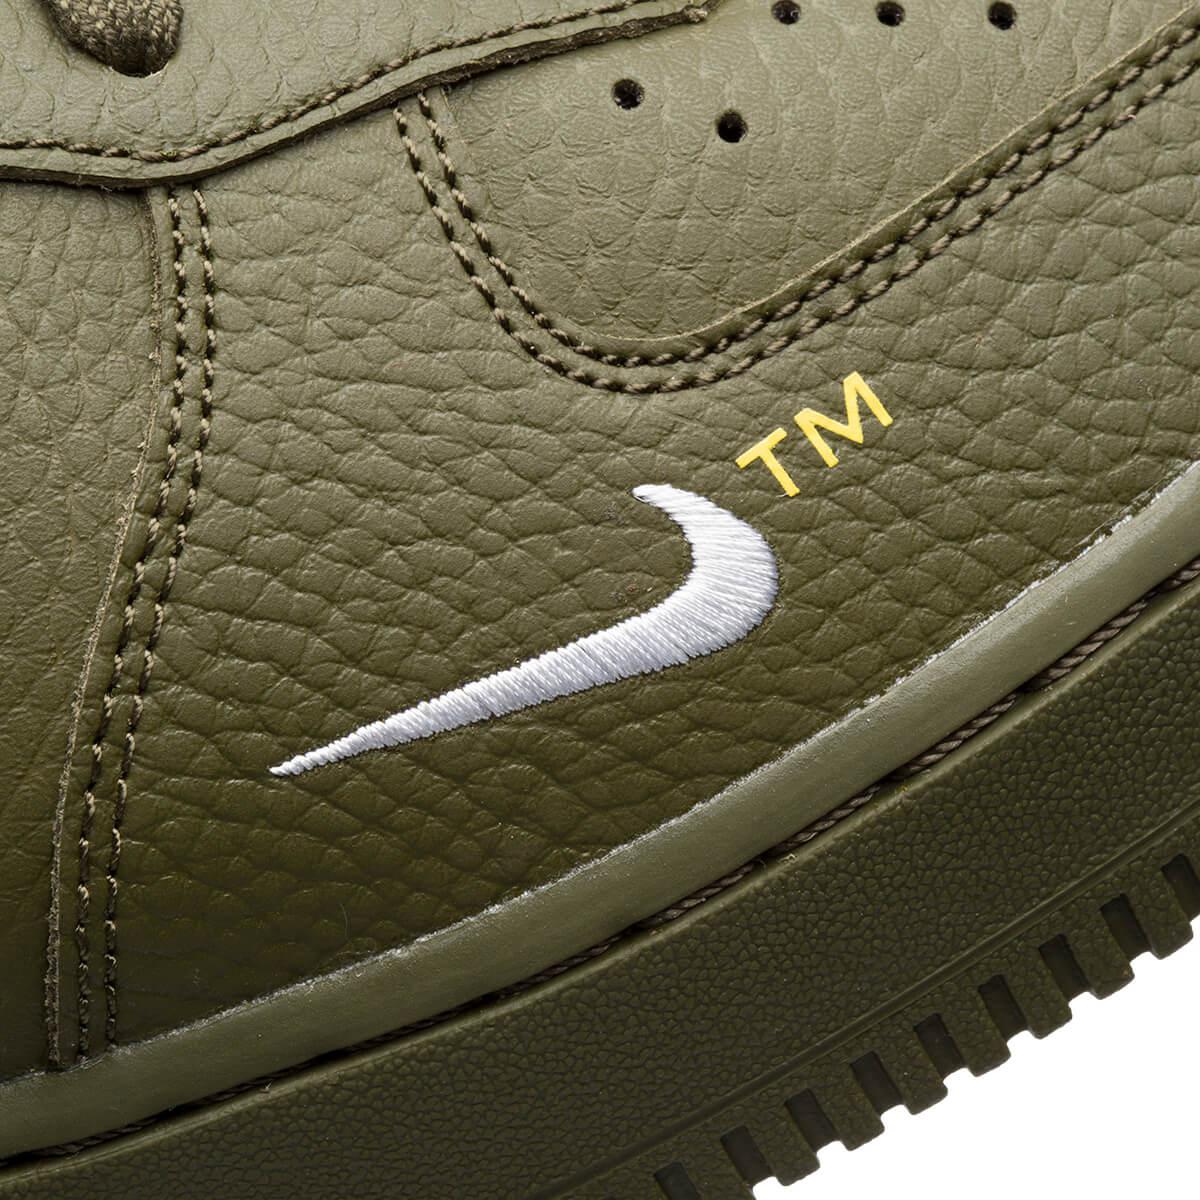 Nike Leather Air Force 1 '07 Lv8 Utility in Olive (Green) for Men - Lyst